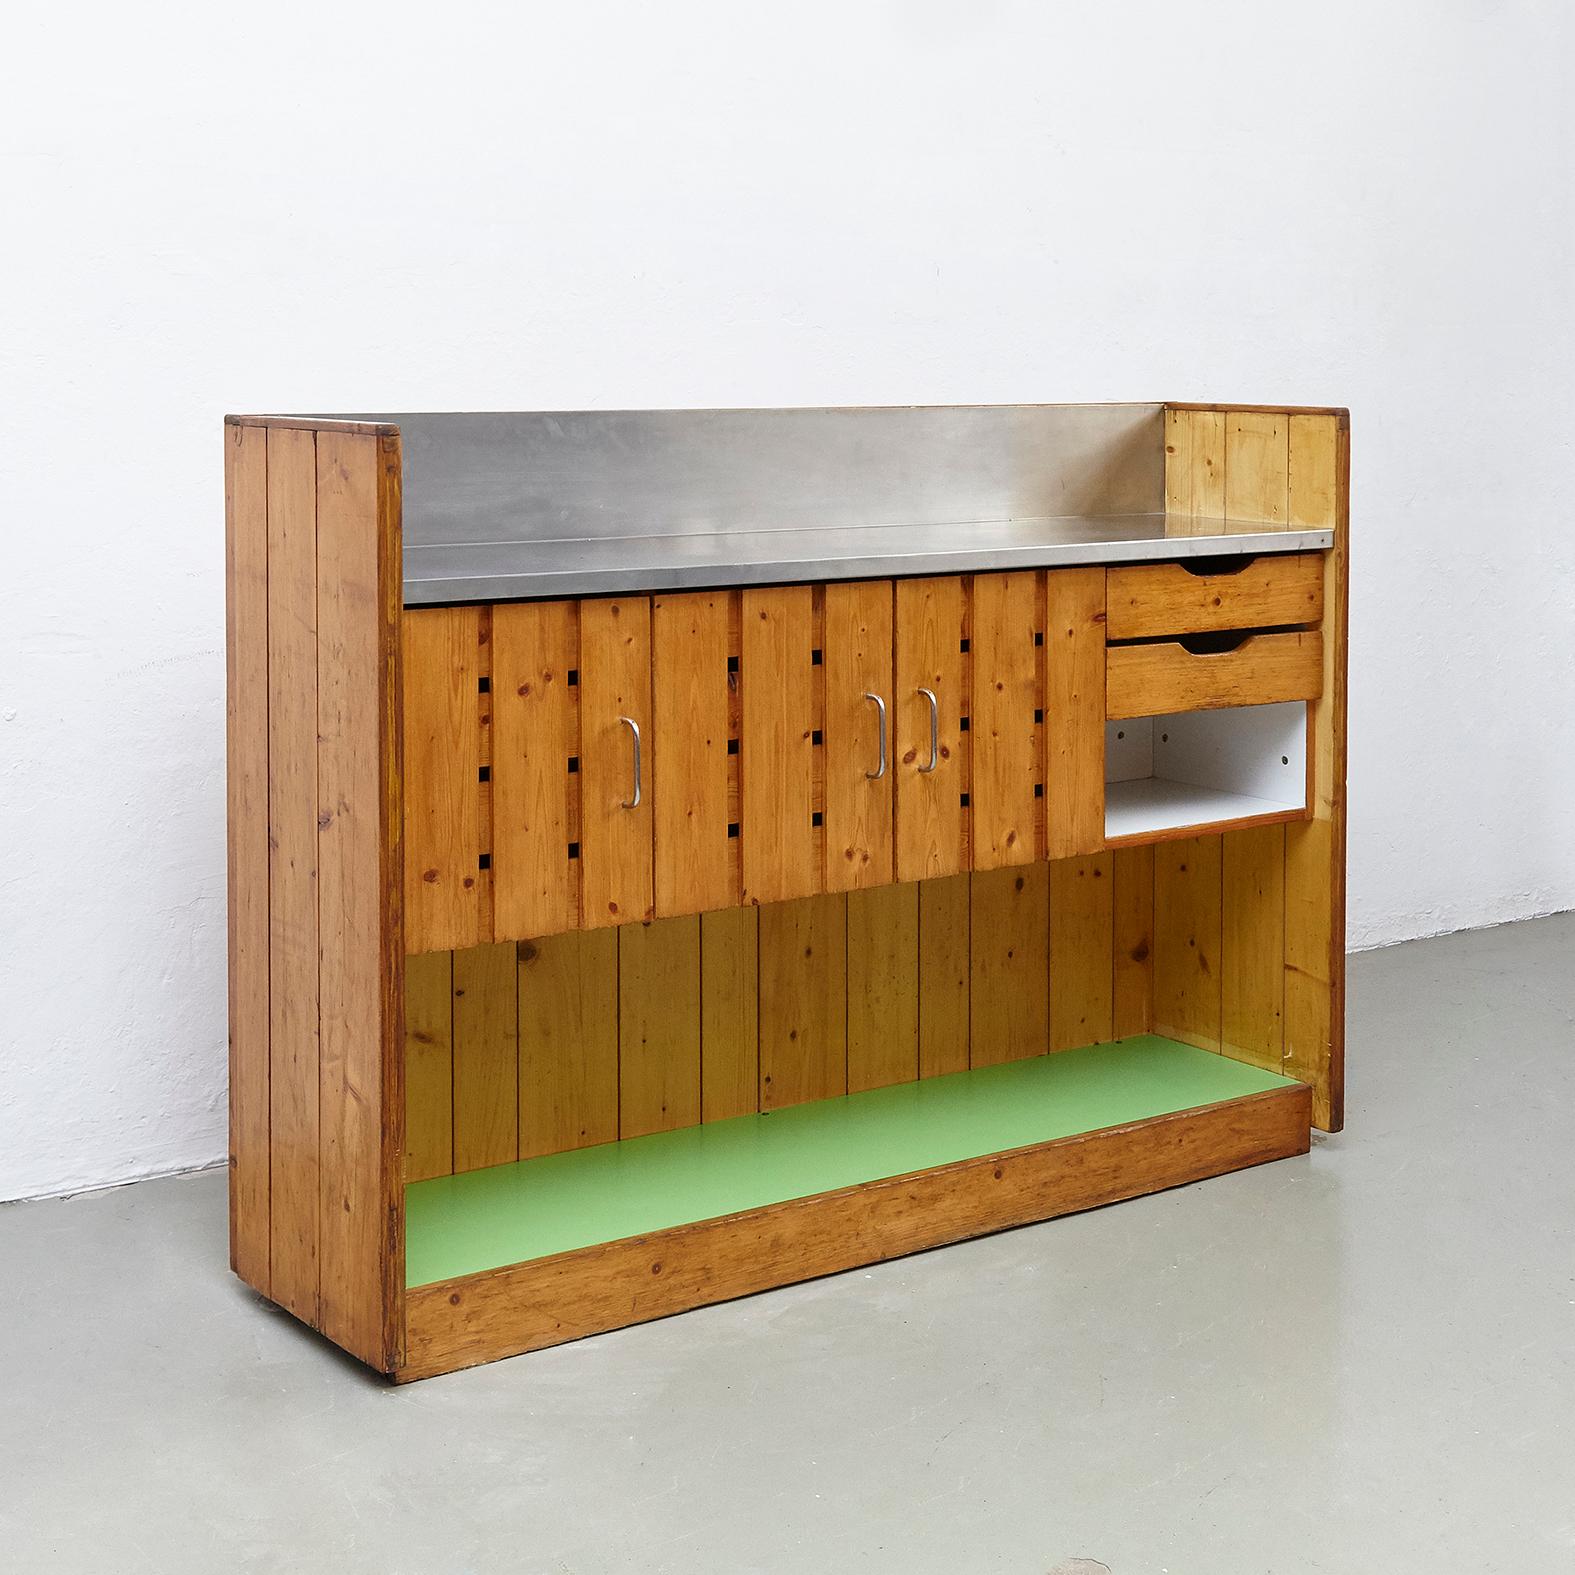 Bar designed by Charlotte Perriand for Les Arcs ski resort, circa 1960, manufactured in France.

Pinewood and metal.

In good original condition, with minor wear consistent with age and use, preserving a beautiful patina.

Charlotte Perriand